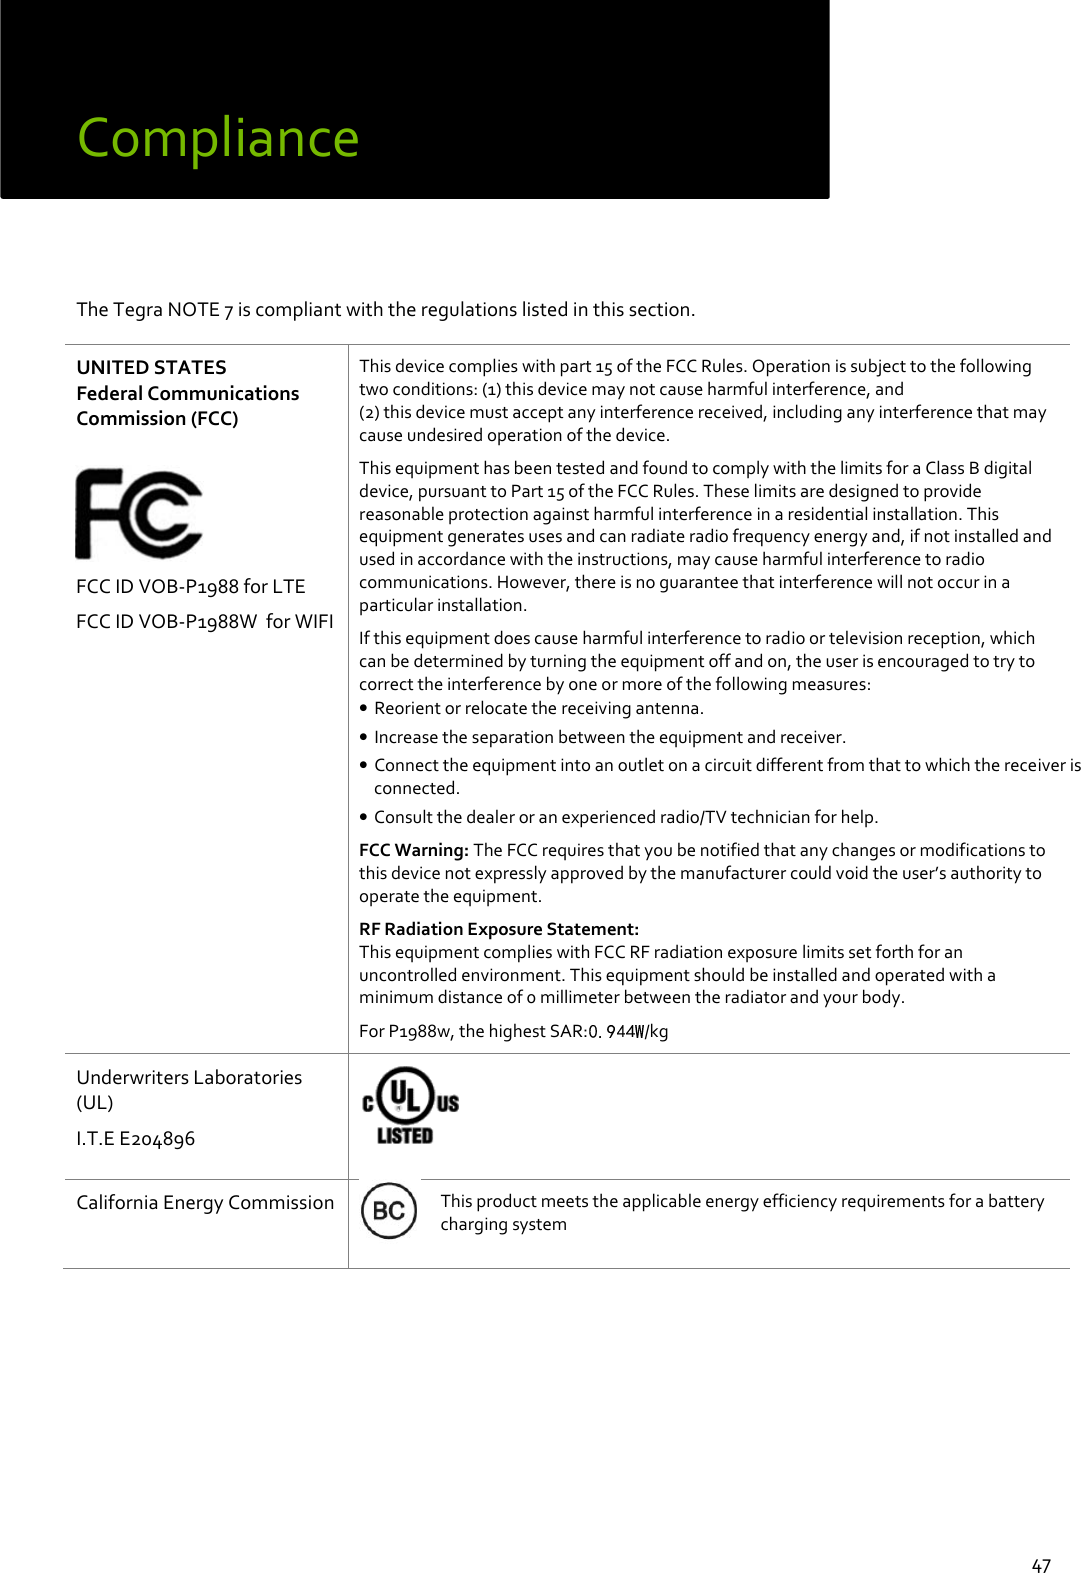  47 Compliance   The Tegra NOTE 7 is compliant with the regulations listed in this section.   UNITED STATES Federal Communications Commission (FCC)    FCC ID VOB-P1988 for LTE FCC ID VOB-P1988W  for WIFI  This device complies with part 15 of the FCC Rules. Operation is subject to the following two conditions: (1) this device may not cause harmful interference, and  (2) this device must accept any interference received, including any interference that may cause undesired operation of the device. This equipment has been tested and found to comply with the limits for a Class B digital device, pursuant to Part 15 of the FCC Rules. These limits are designed to provide reasonable protection against harmful interference in a residential installation. This equipment generates uses and can radiate radio frequency energy and, if not installed and used in accordance with the instructions, may cause harmful interference to radio communications. However, there is no guarantee that interference will not occur in a particular installation. If this equipment does cause harmful interference to radio or television reception, which can be determined by turning the equipment off and on, the user is encouraged to try to correct the interference by one or more of the following measures: • Reorient or relocate the receiving antenna. • Increase the separation between the equipment and receiver. • Connect the equipment into an outlet on a circuit different from that to which the receiver is connected. • Consult the dealer or an experienced radio/TV technician for help. FCC Warning: The FCC requires that you be notified that any changes or modifications to this device not expressly approved by the manufacturer could void the user’s authority to operate the equipment.  RF Radiation Exposure Statement: This equipment complies with FCC RF radiation exposure limits set forth for an uncontrolled environment. This equipment should be installed and operated with a minimum distance of 0 millimeter between the radiator and your body. For P1988w, the highest SAR: /kg Underwriters Laboratories (UL) I.T.E E204896    California Energy Commission  This product meets the applicable energy efficiency requirements for a battery charging system     